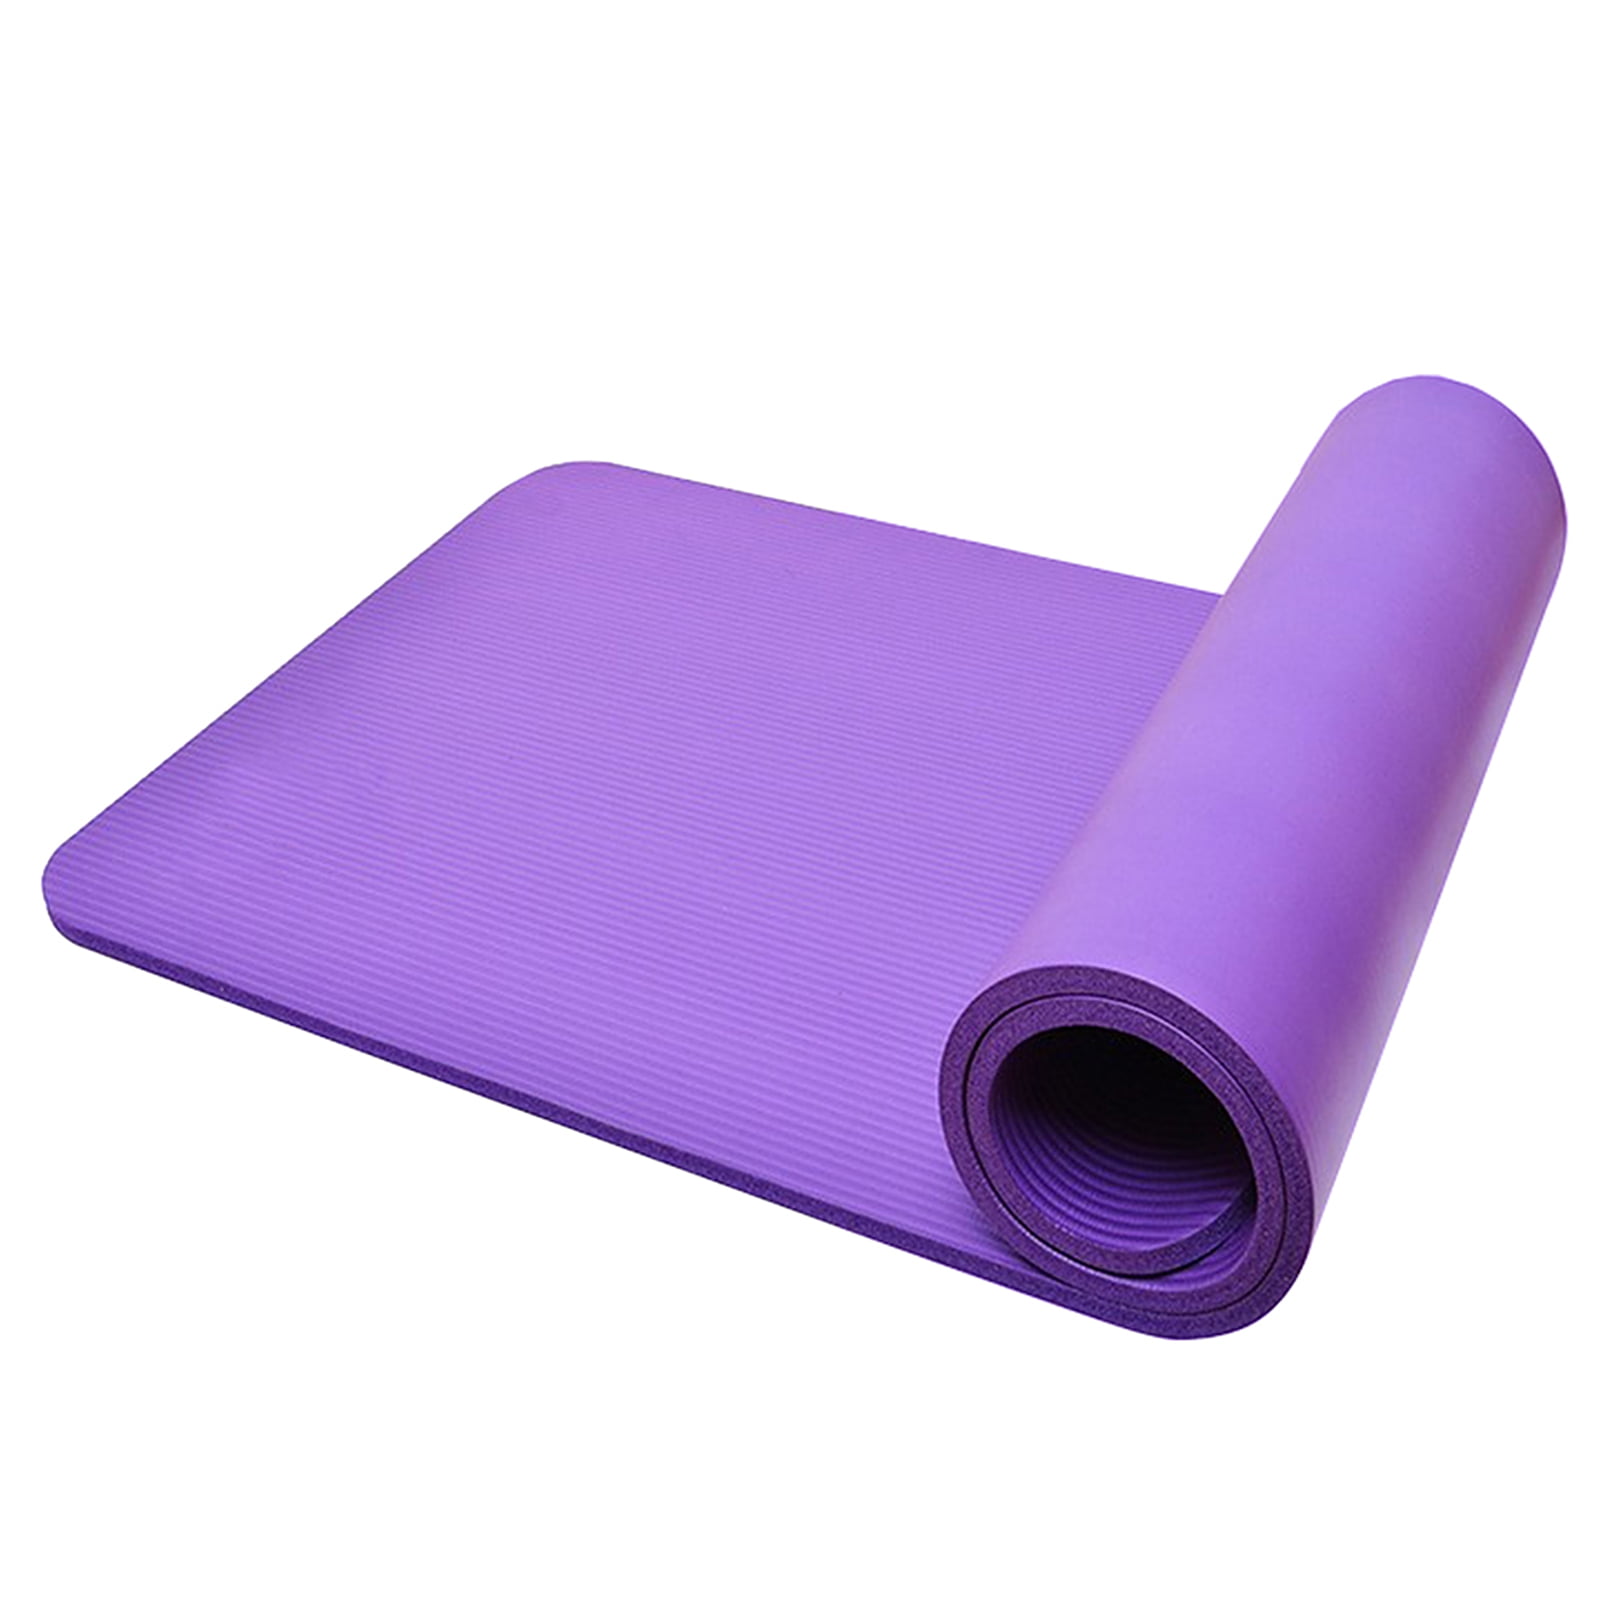 Yoga Mat 10mm NBR THICK Foam For Pilates Gym Exercise With Carry Strap PURPLE 